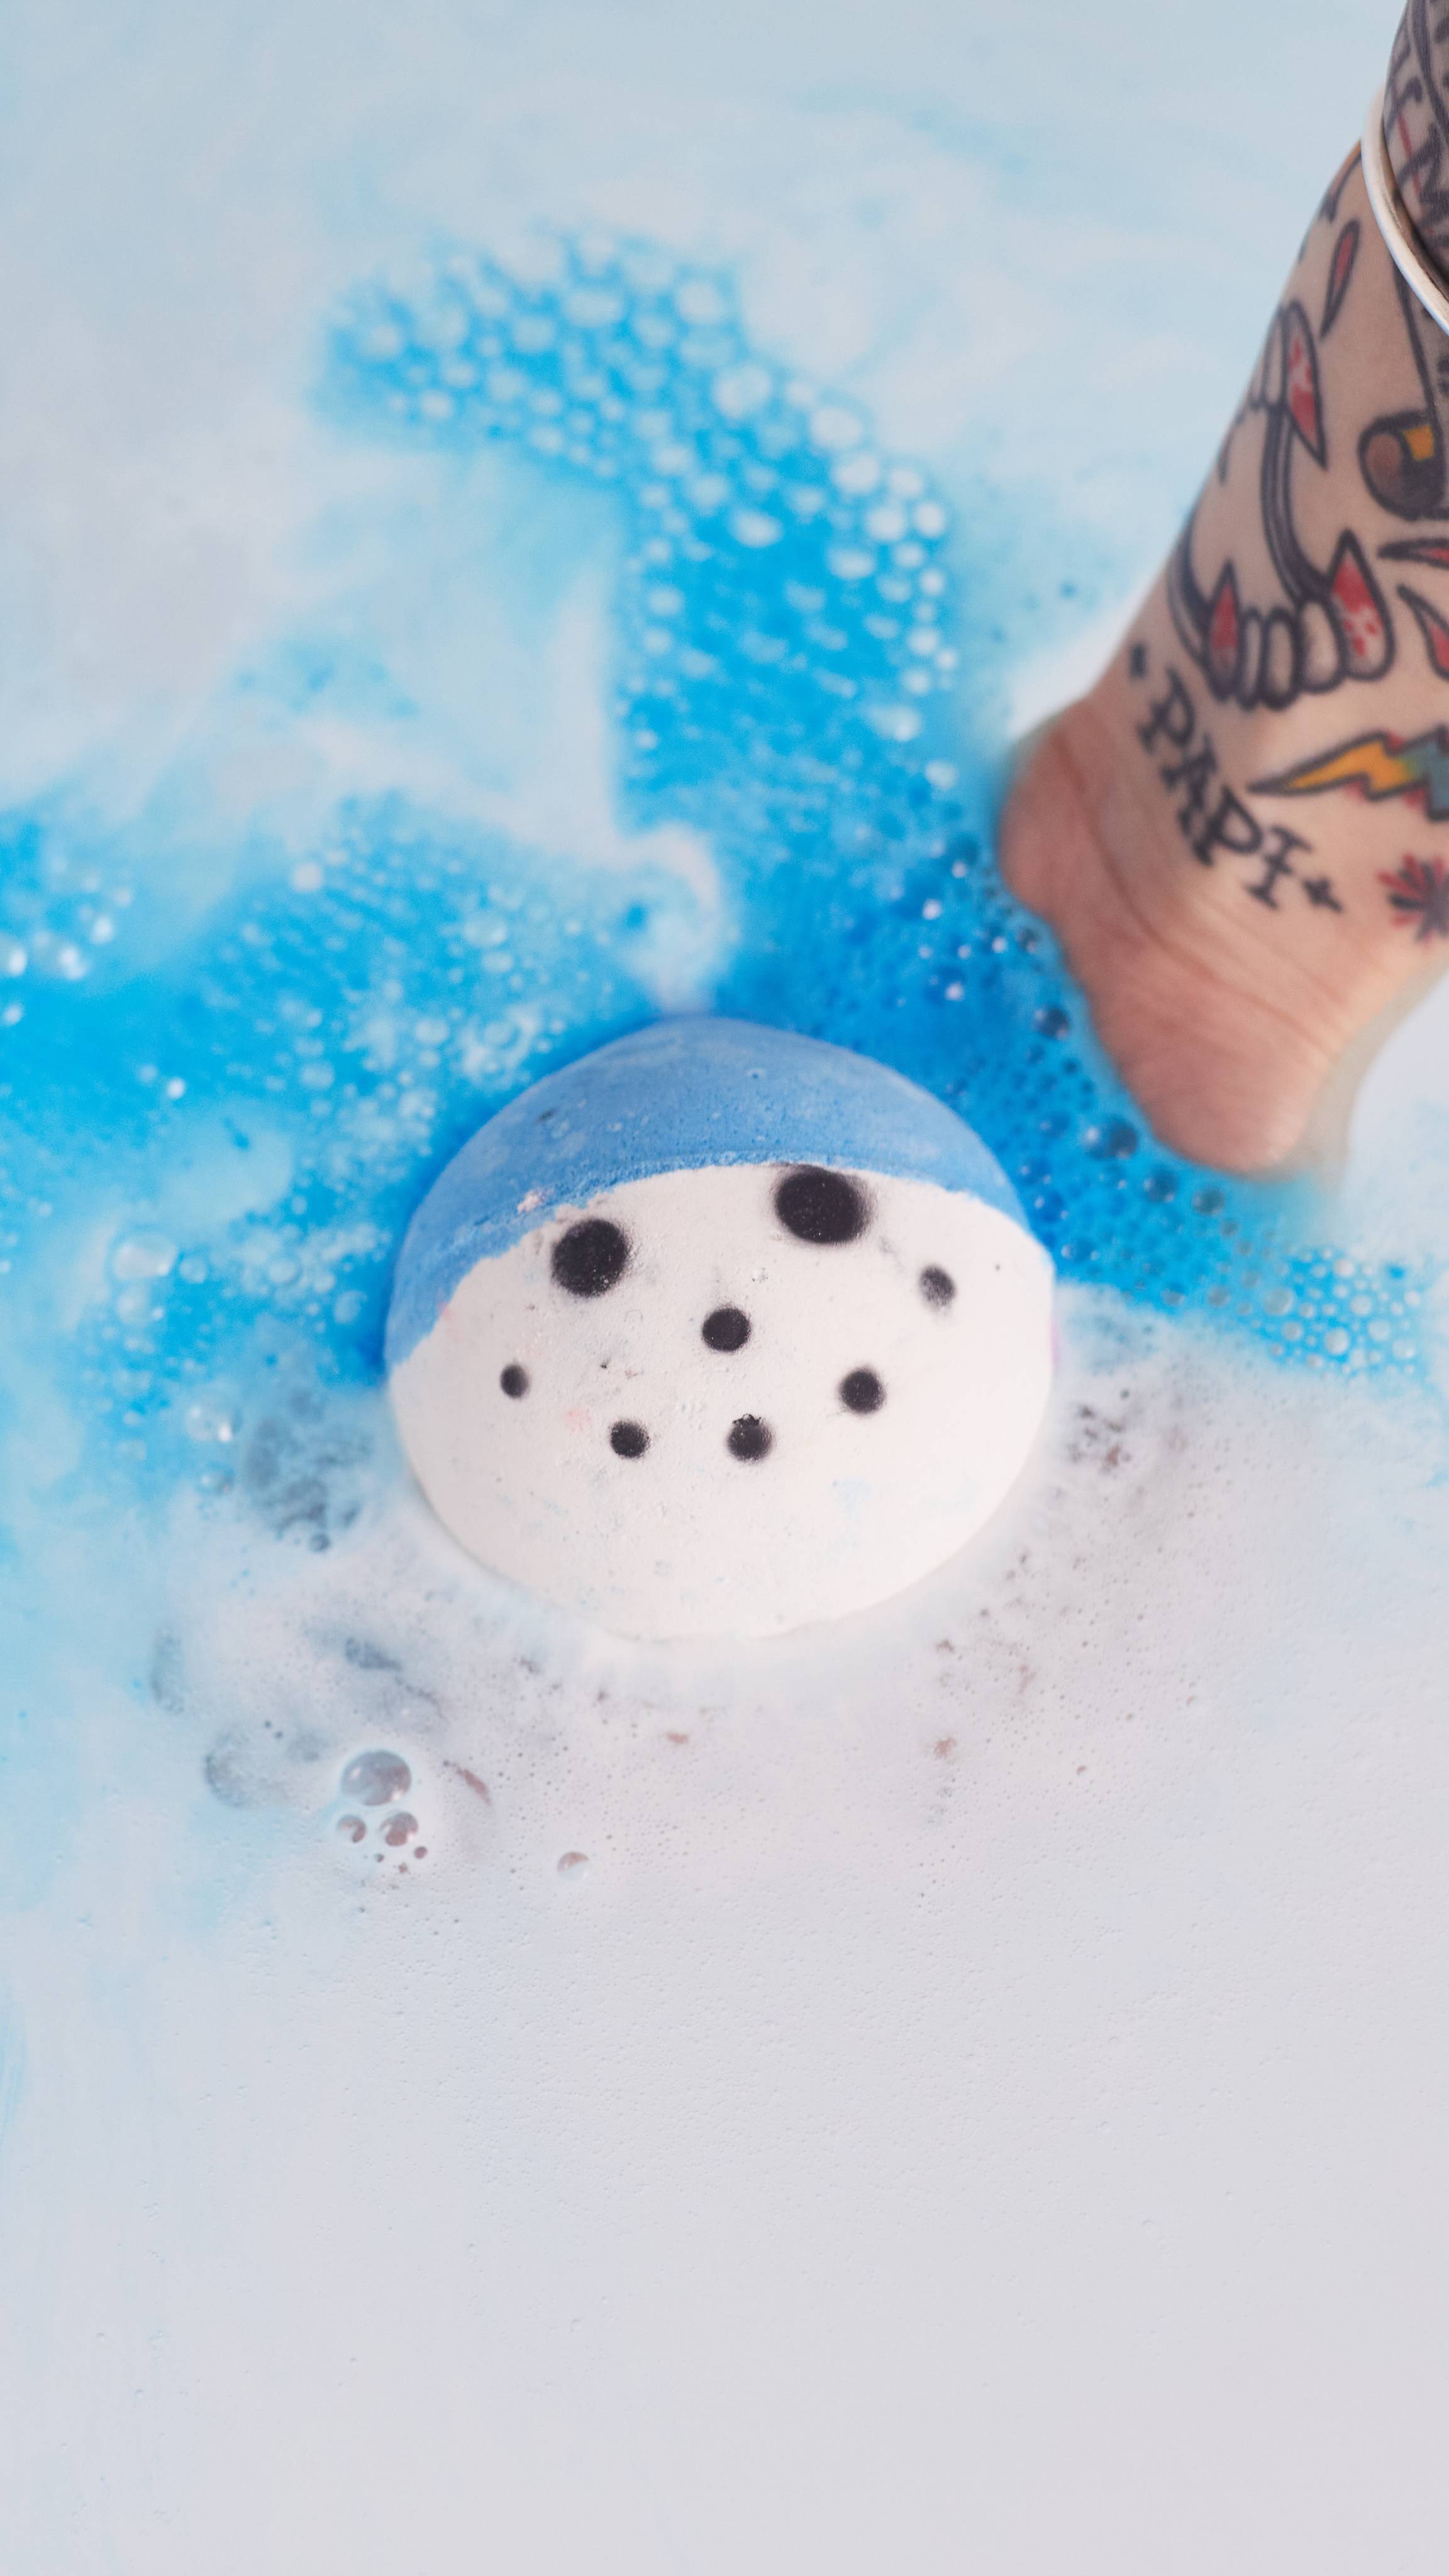 Image shows the model gently placing the Snowy bath bomb into water as the face and blue hat dissolves.